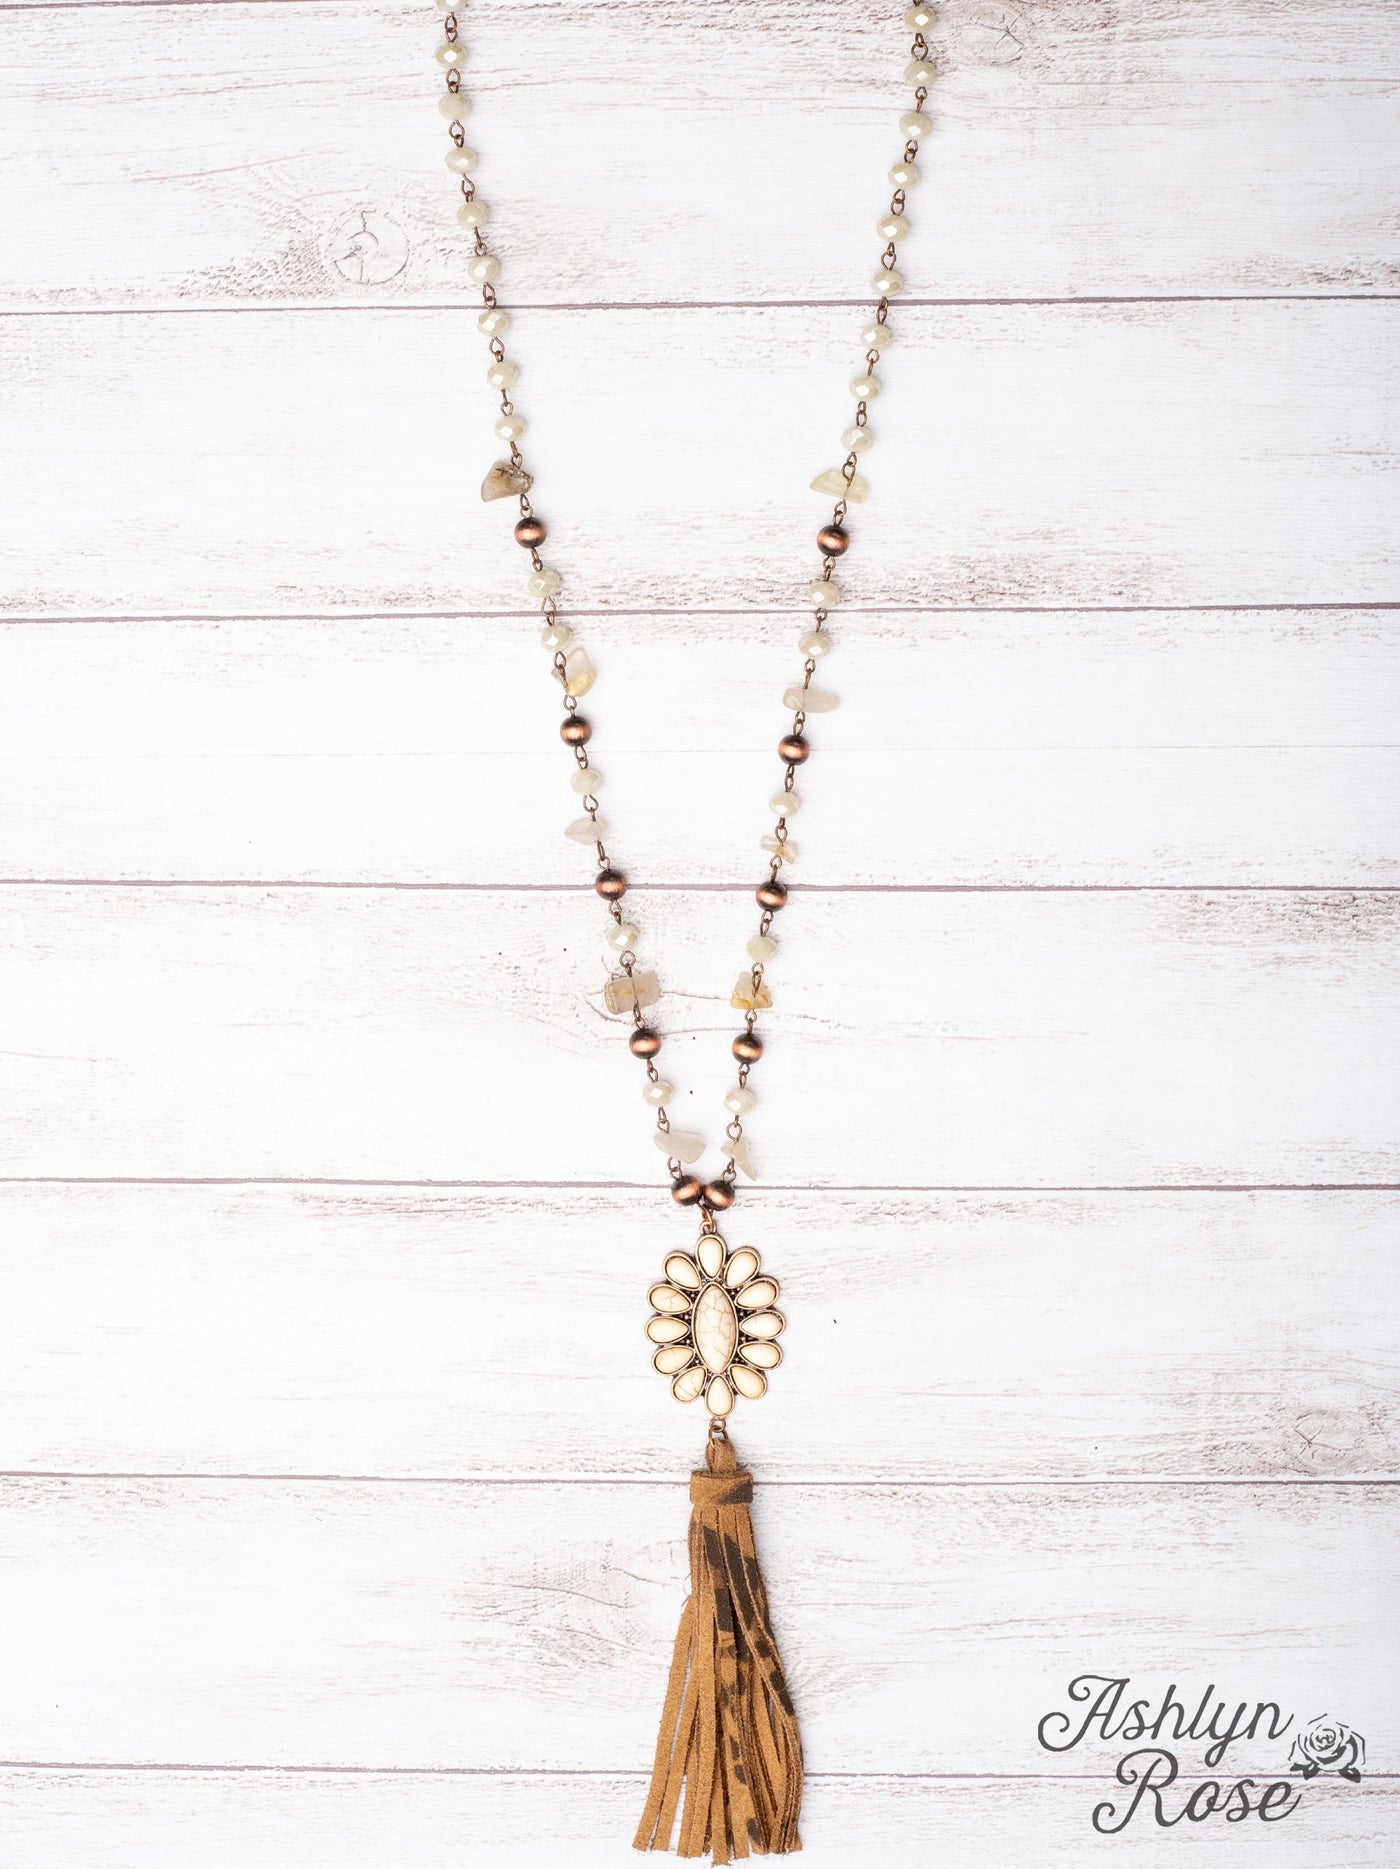 Dibs on the Cowboy Beaded Chain Necklace with Cream Concho Stone